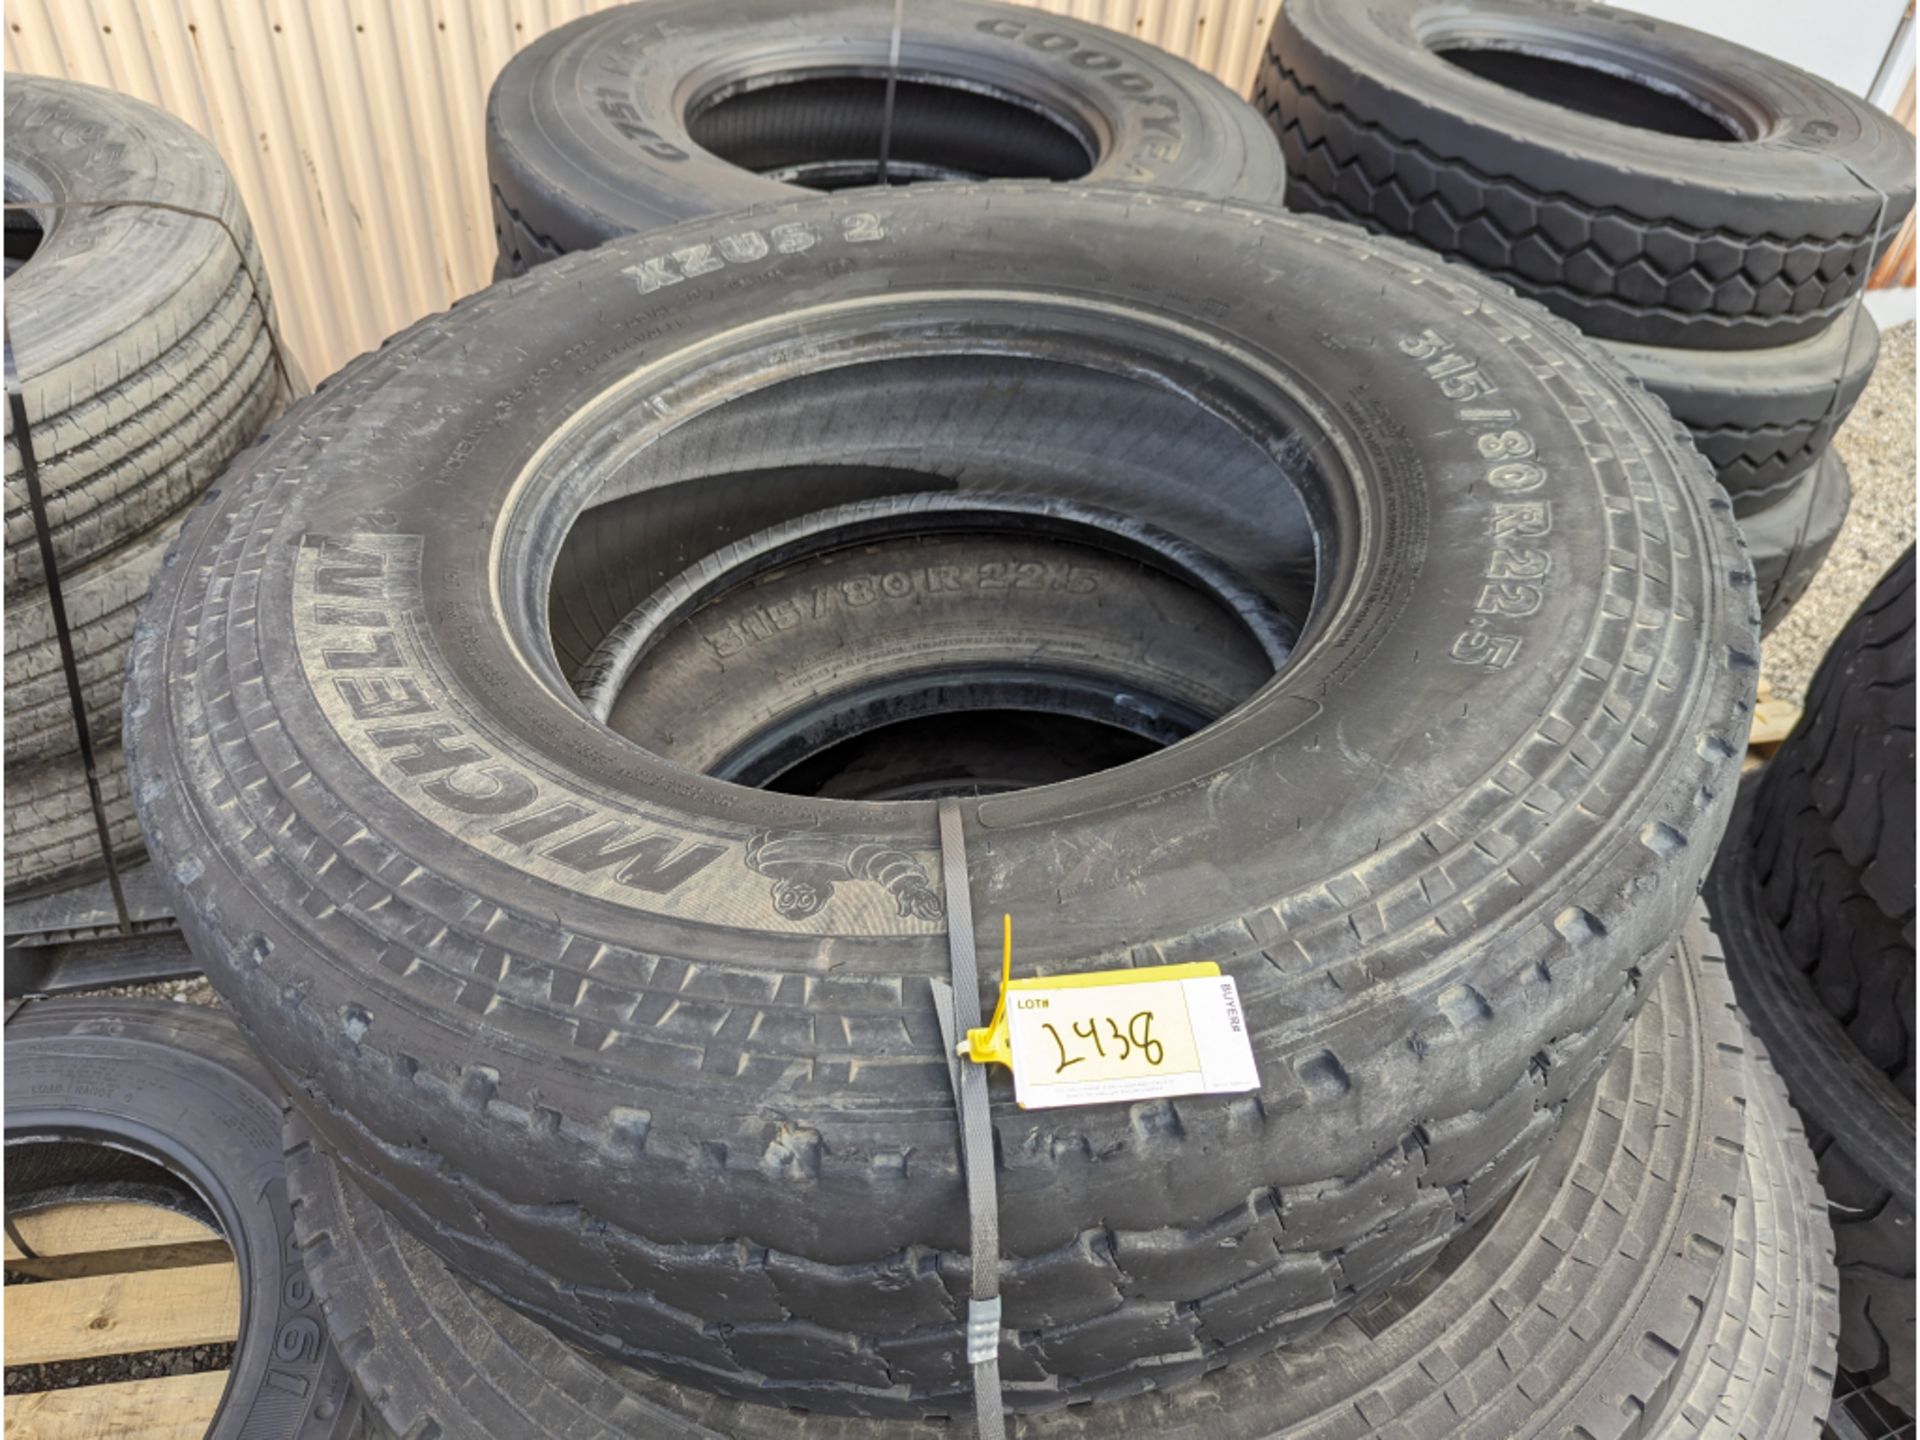 (4) Michelin XZUS 2 315/80R22.5 commercial truck tires USED Virgin Tread Surplus Take Off - Image 4 of 6